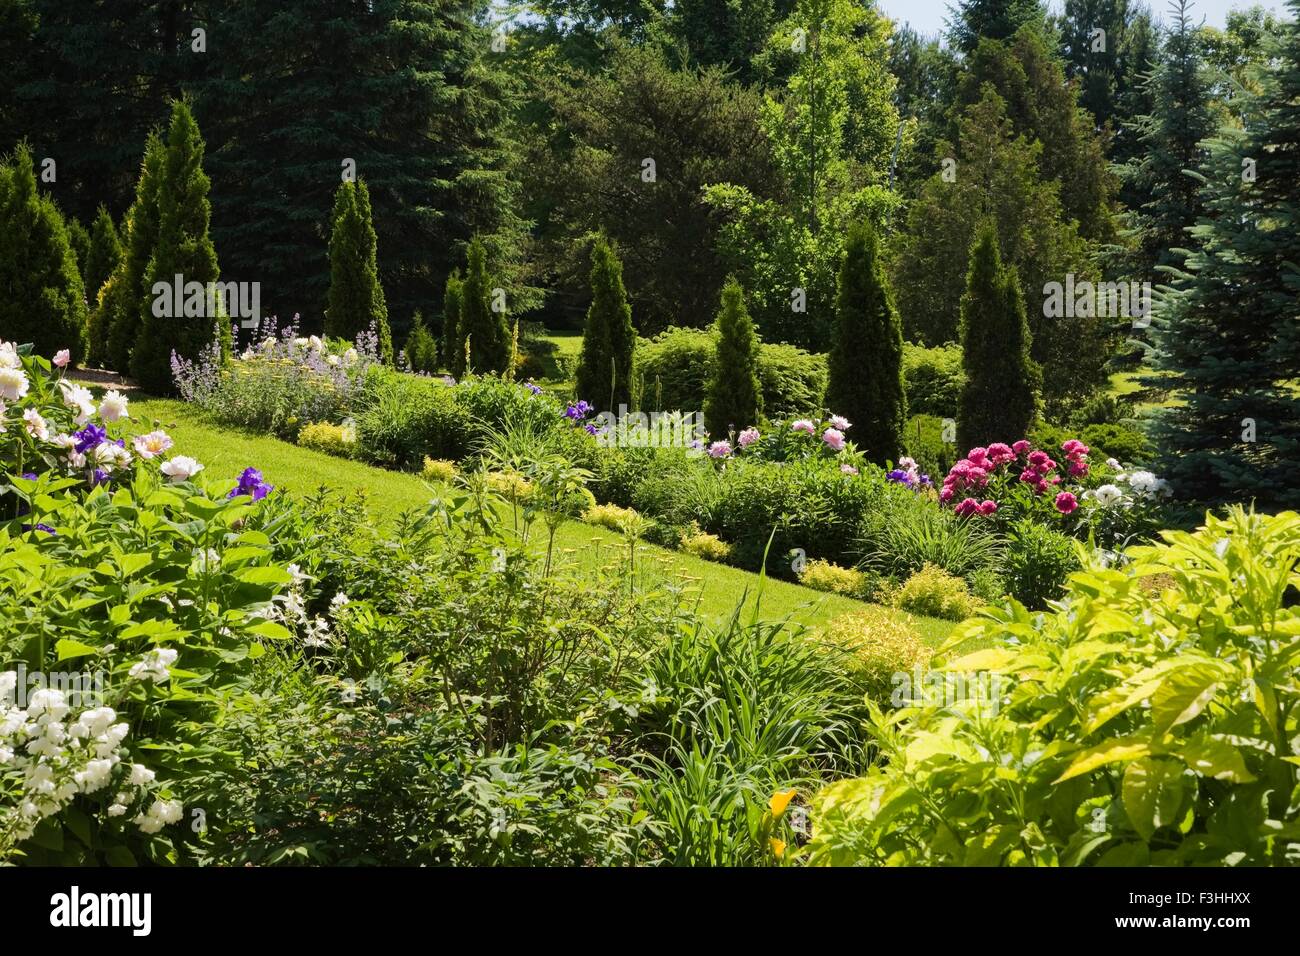 Border with pink, red and white peony (paeonia) and Cedar trees (thuja occidentalis) in backyard garden in spring season Stock Photo